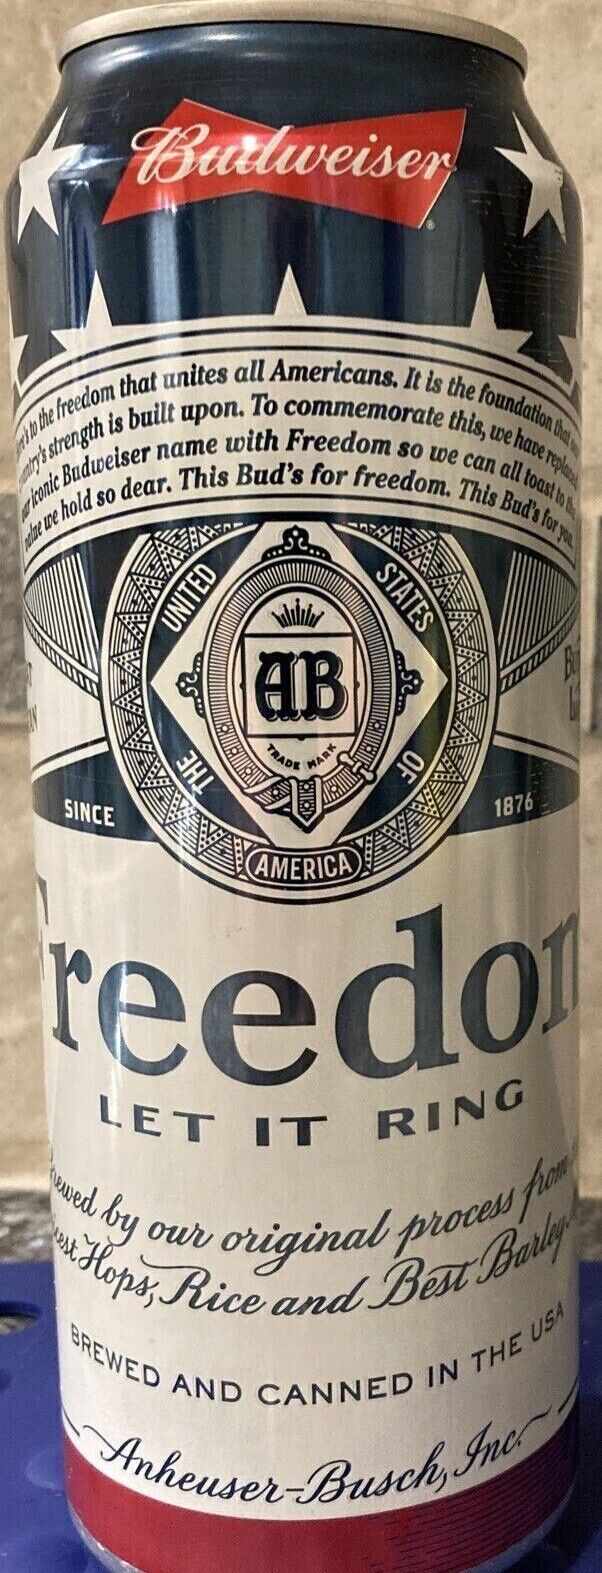 24oz Budweiser Freedom “let it ring” commemorative 16 oz. EMPTY beer can